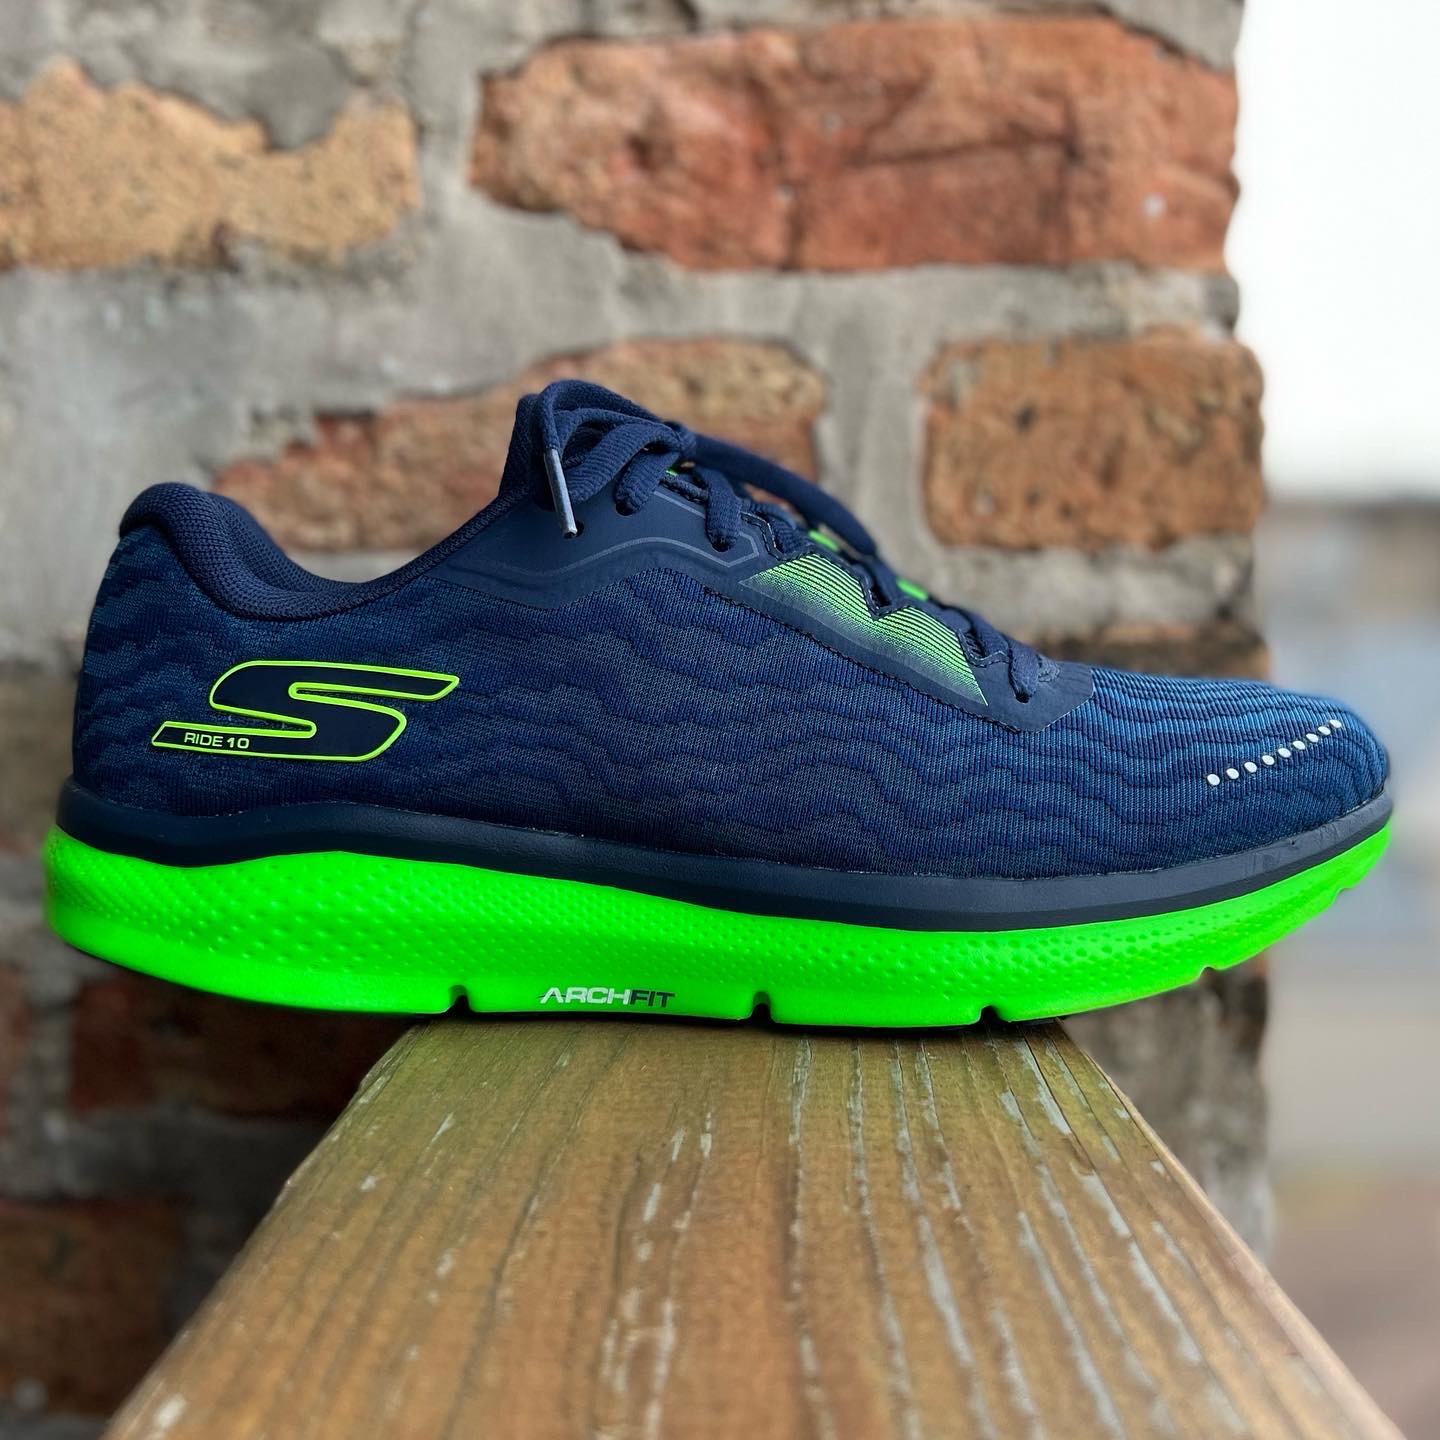 Jadeo Inflar sensación Road Trail Run: Skechers Performance GO Run Ride 10 Multi Tester Review at  50 Miles Plus: A Pleasant Light Everyday Trainer